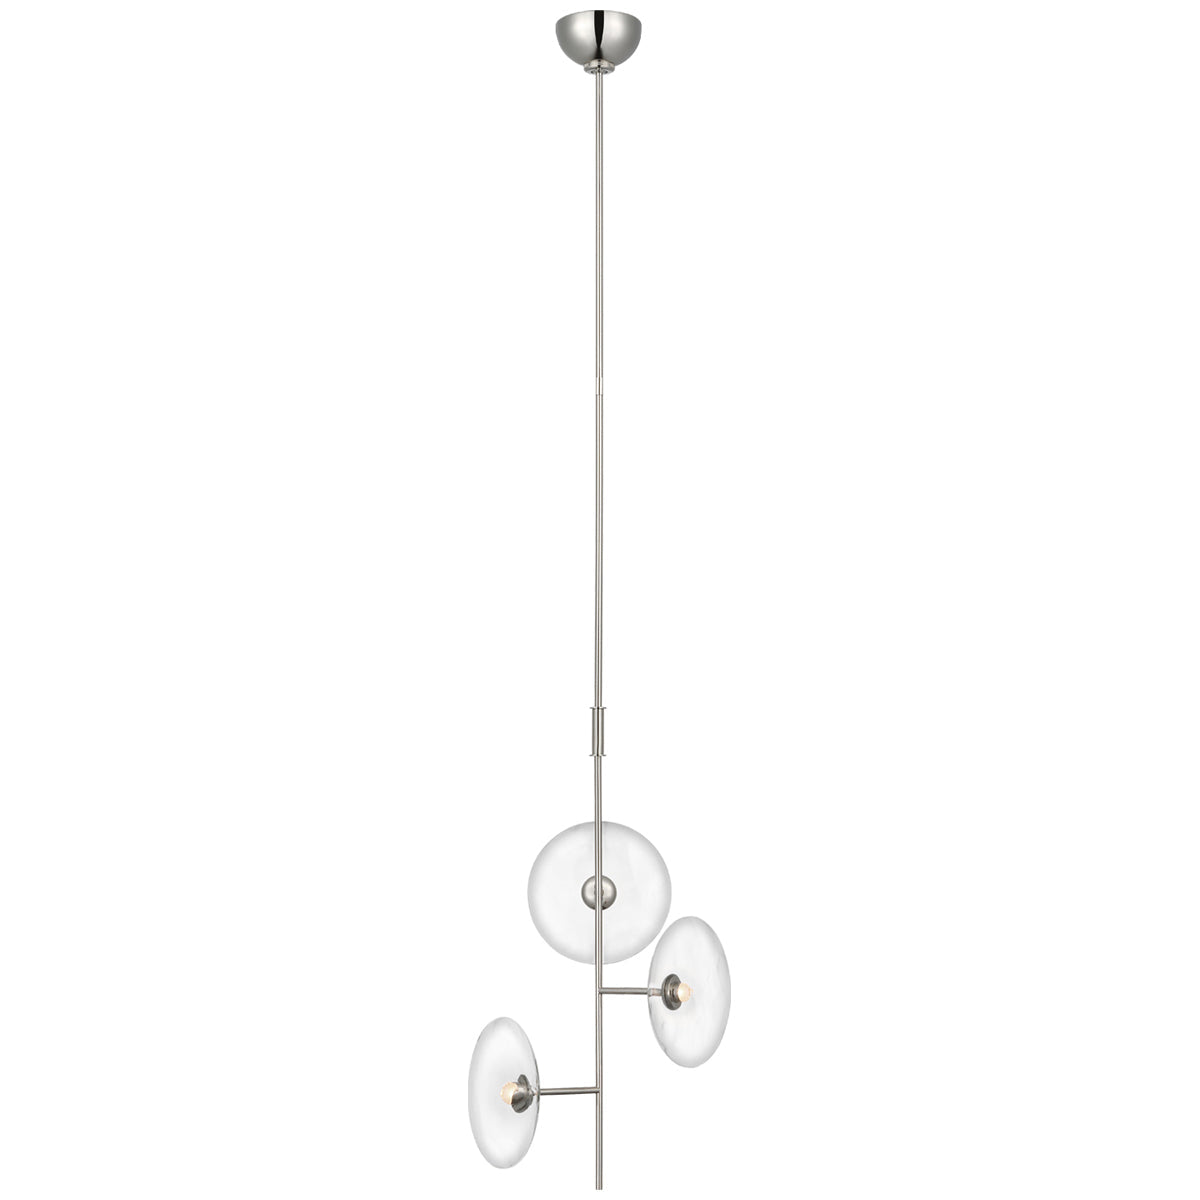 Visual Comfort Calvino Mini 3-Light Chandelier with Clear Glass